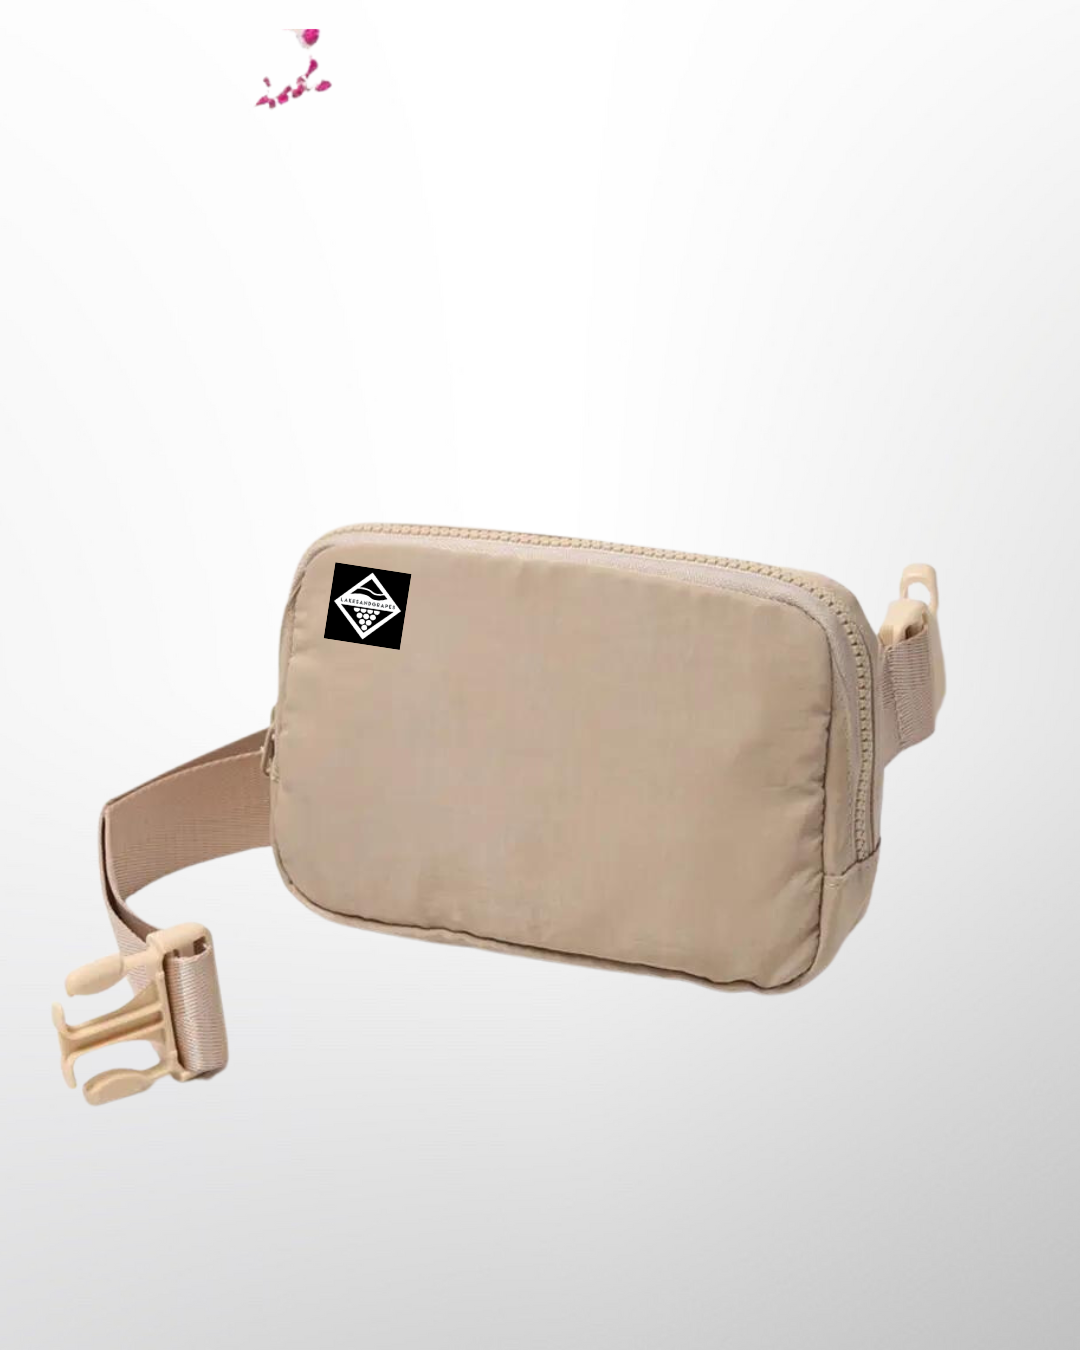 This image showcases the Lakes and Grapes Tan Classic Belt Bag. It's crafted with both fashion and function in mind, providing a secure and accessible way to carry your essentials while on the go.